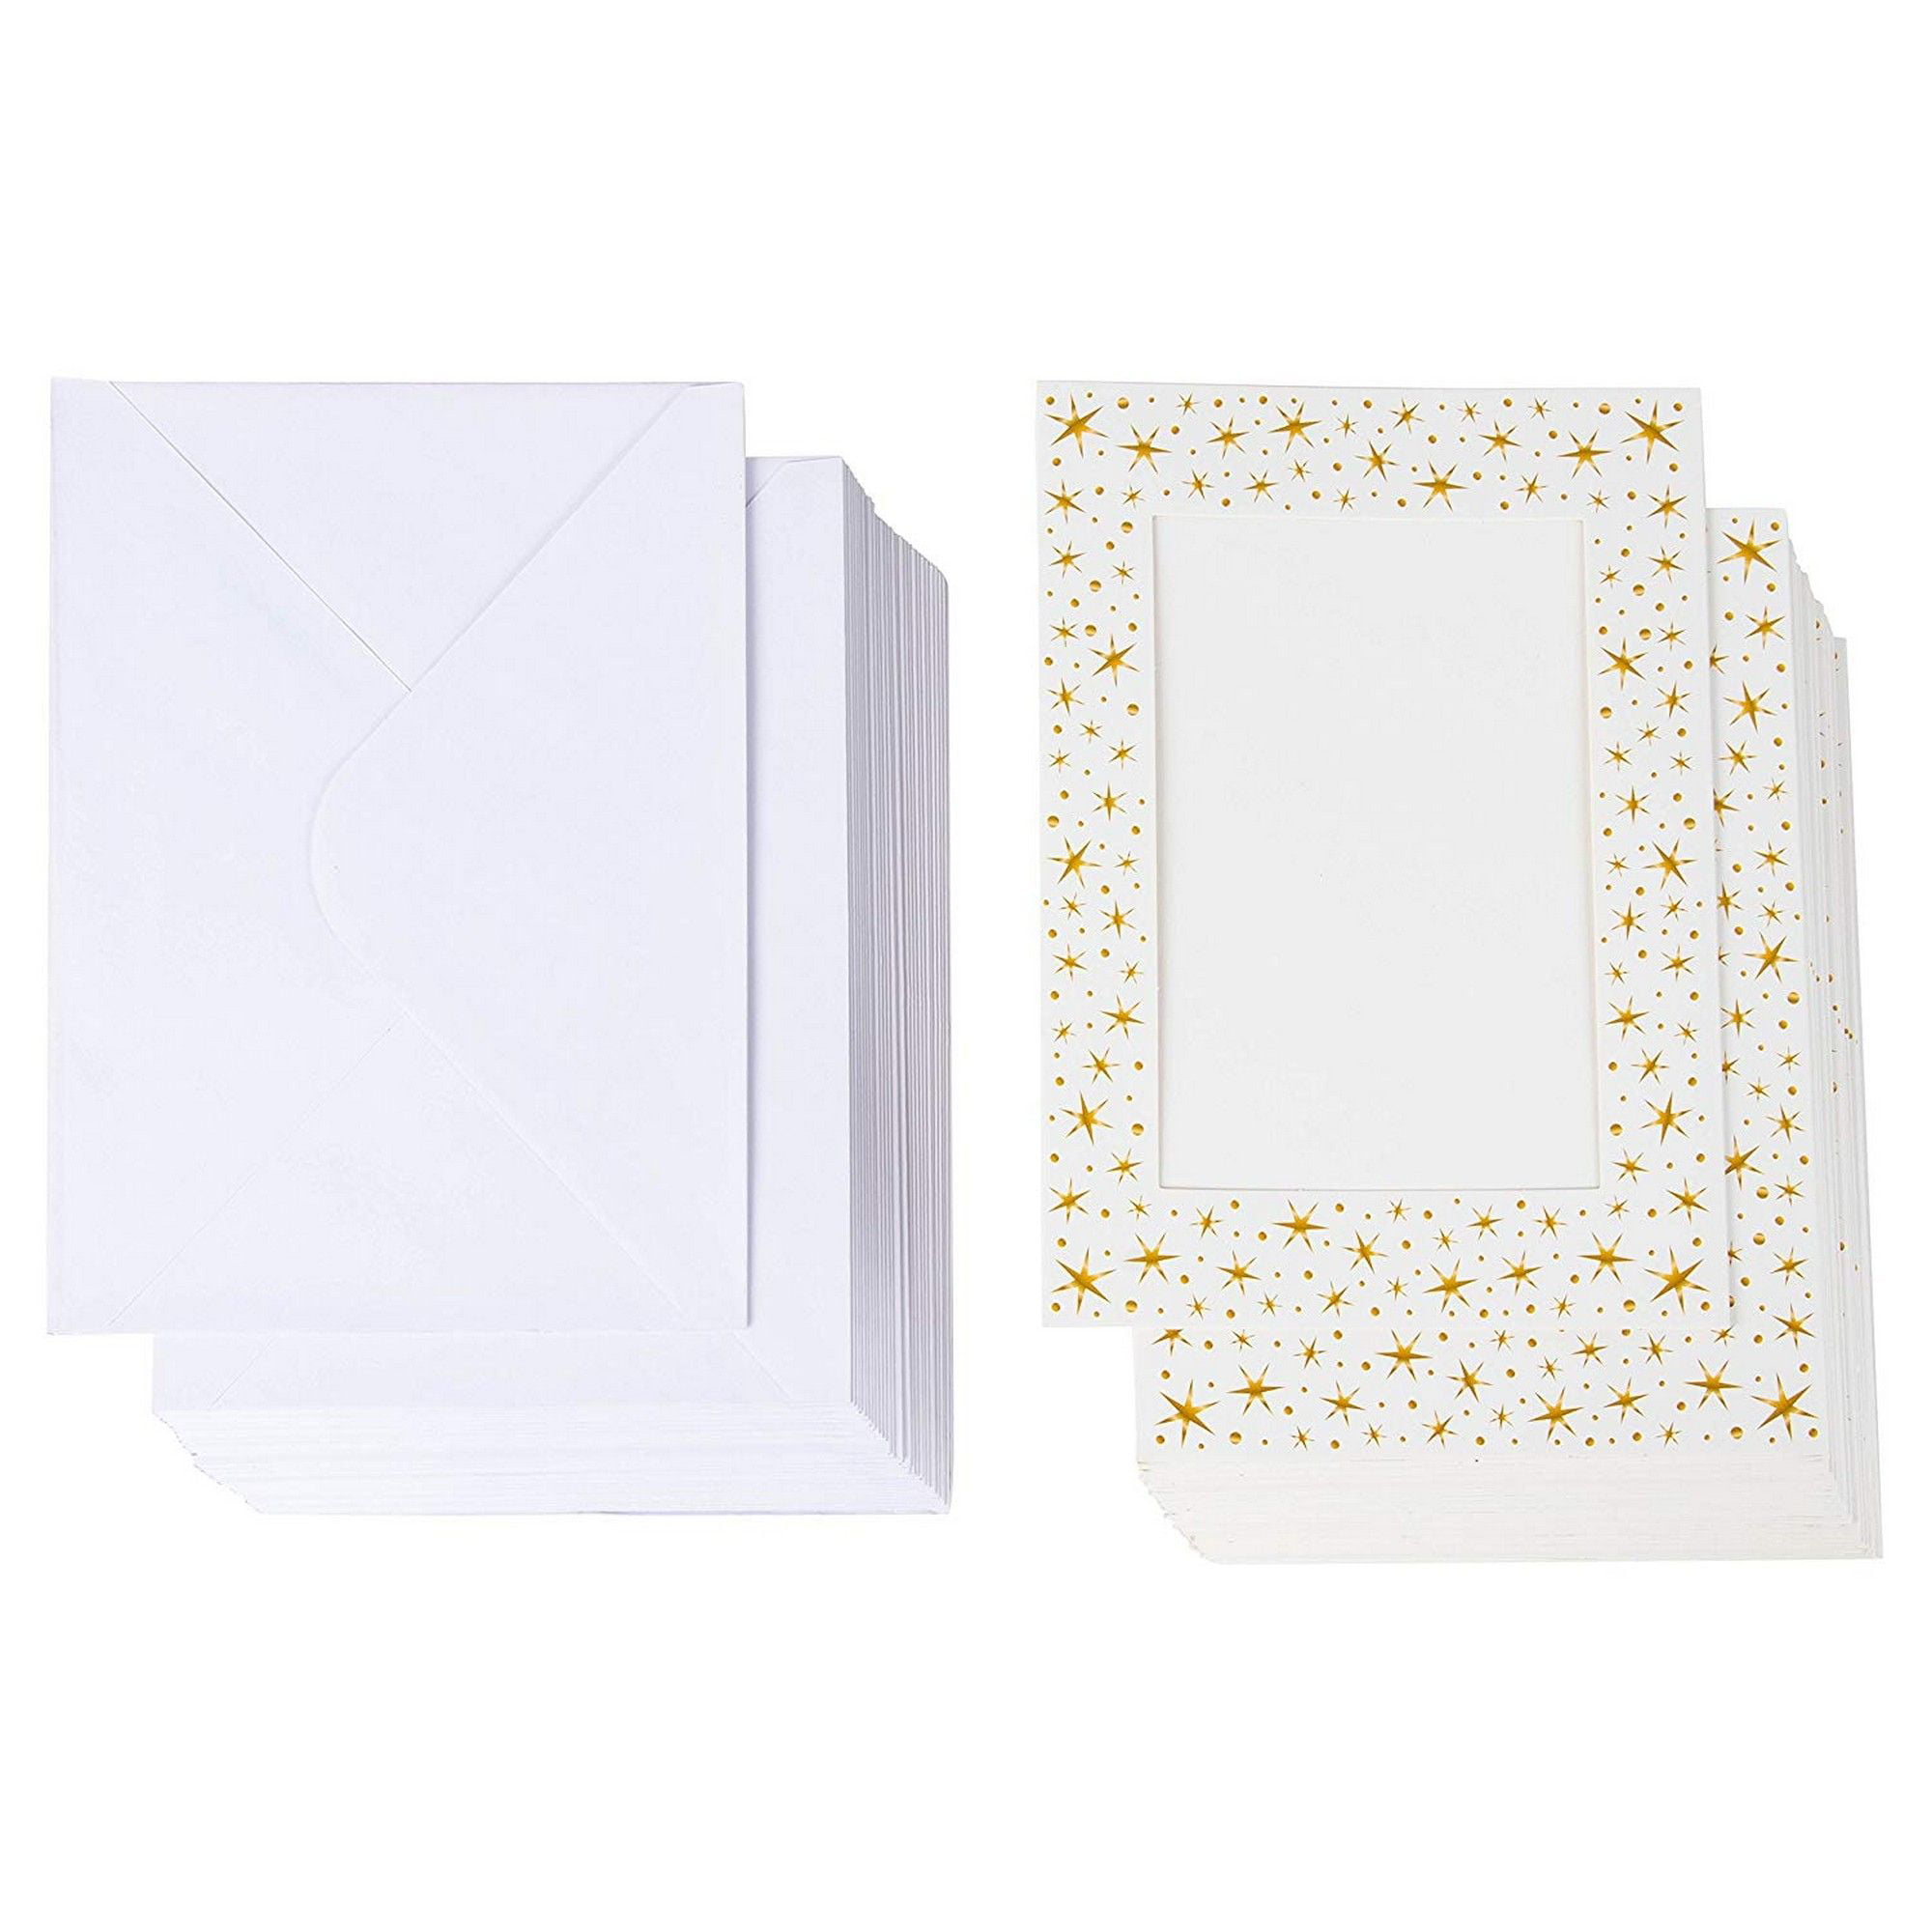 with Brown Paper or White Envelopes Blessed Diwali 5 cards in a Set 3.5 x 5 inch Cards